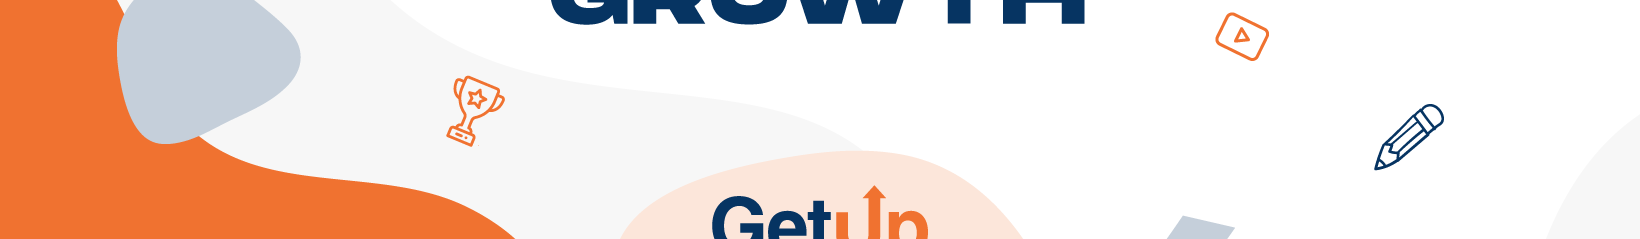 GetUp Limited's profile banner